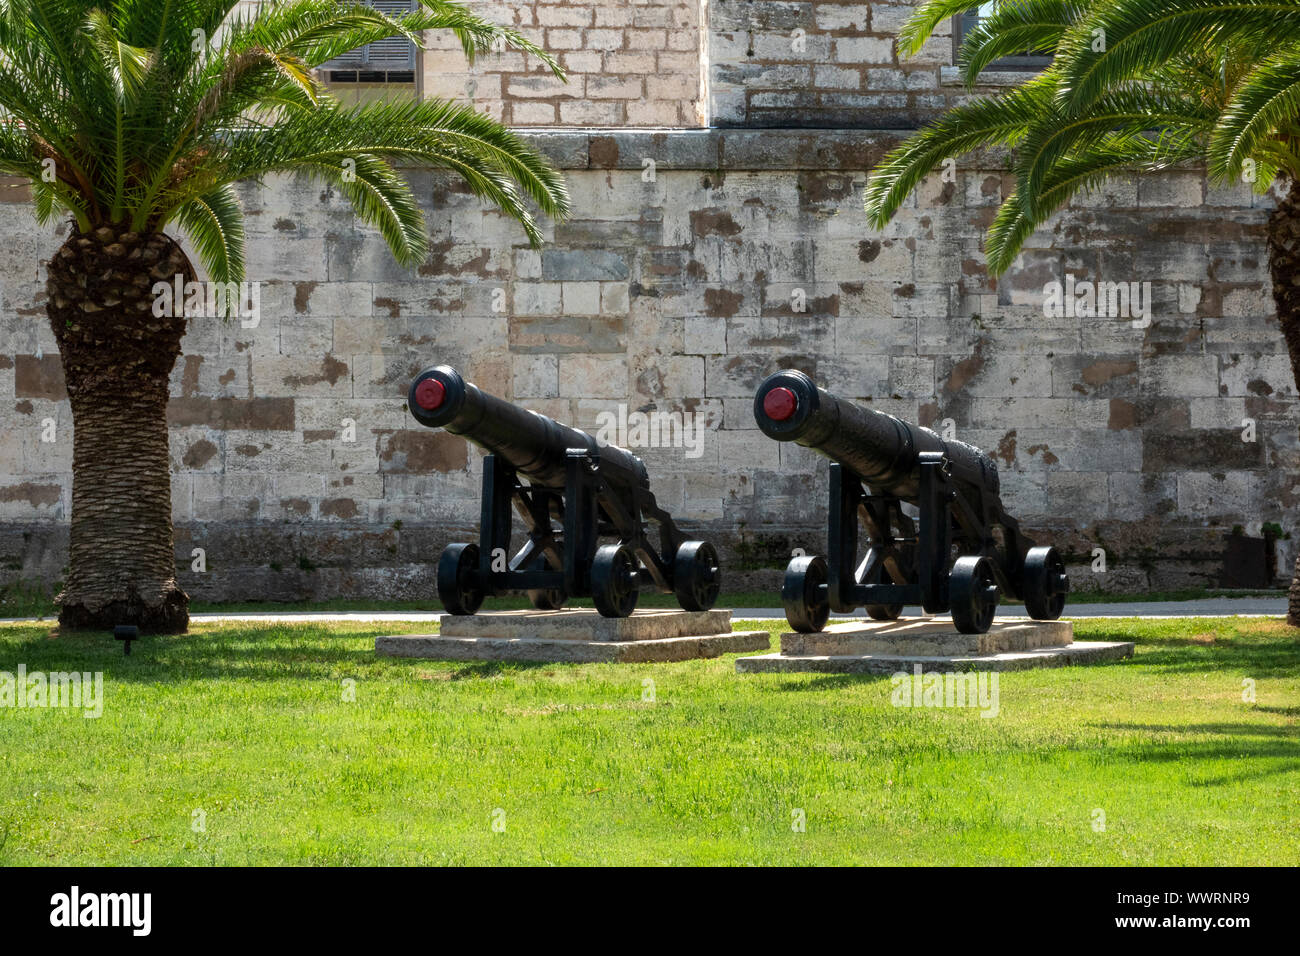 Two muzzle loading cannons in Victualling Yard at The Royal Naval Dockyard, Bermuda Stock Photo